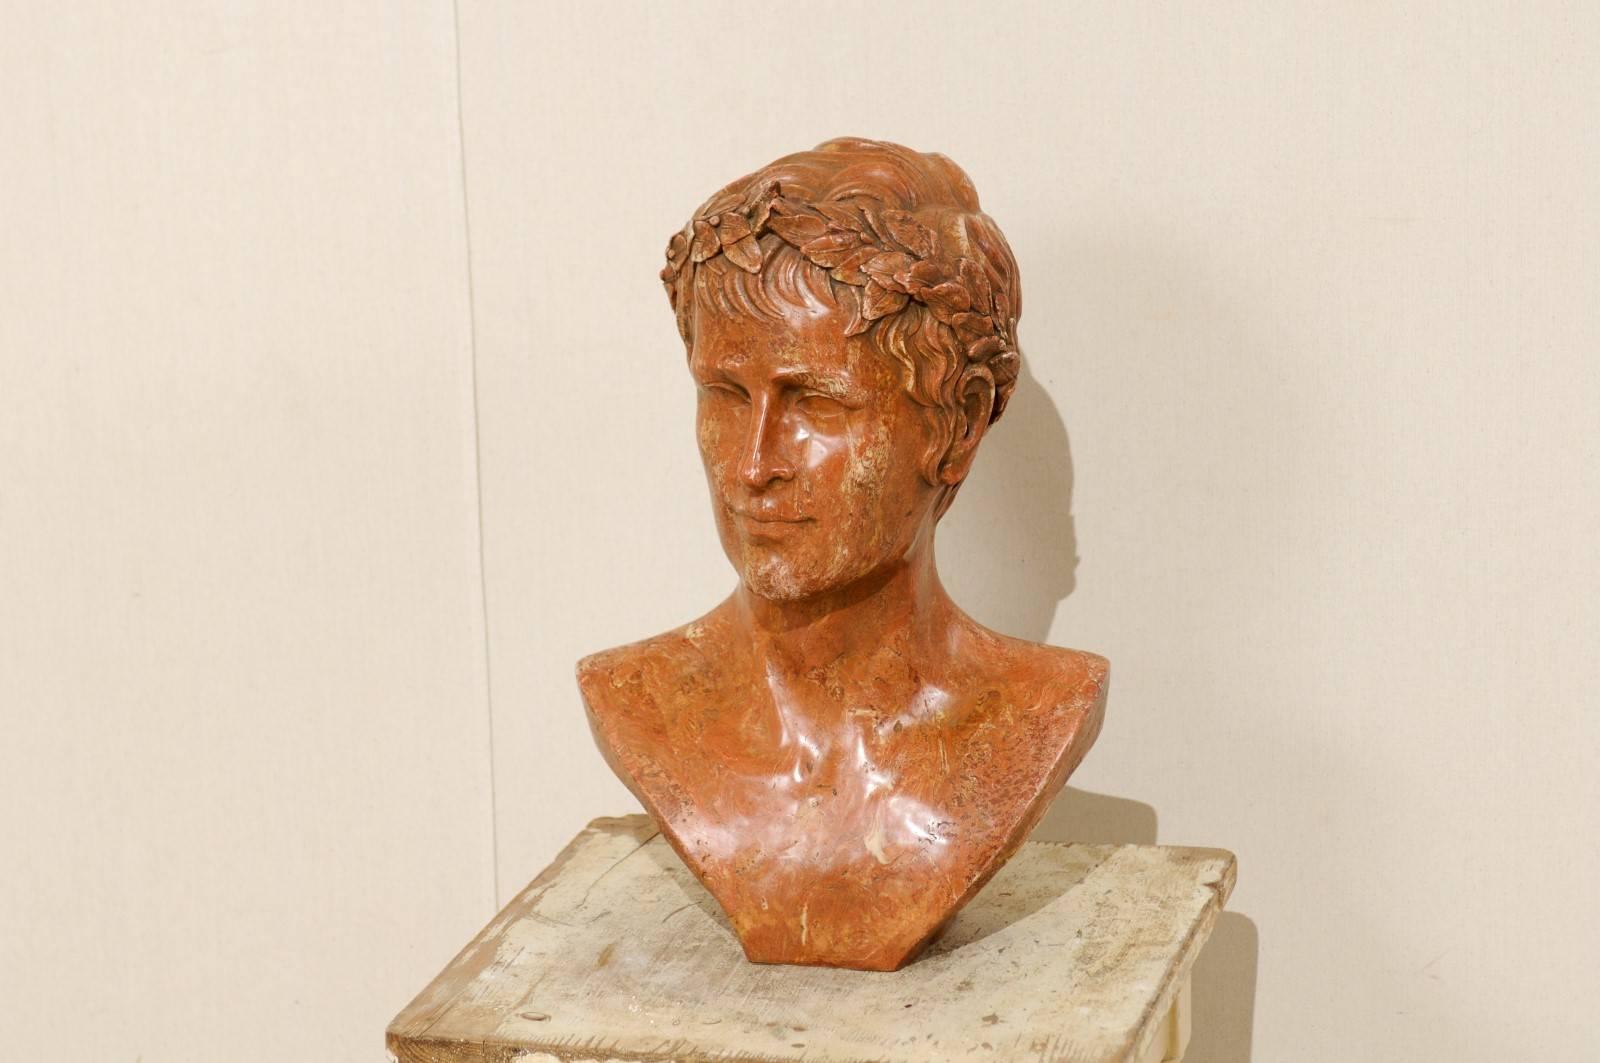 A bust of an unknown Roman Emperor. This bust has been constructed of a marbleized resin, during the last quarter of the 20th century. The colors are primarily warm, in the family of rust and clay with lighter veining throughout. The wearing of